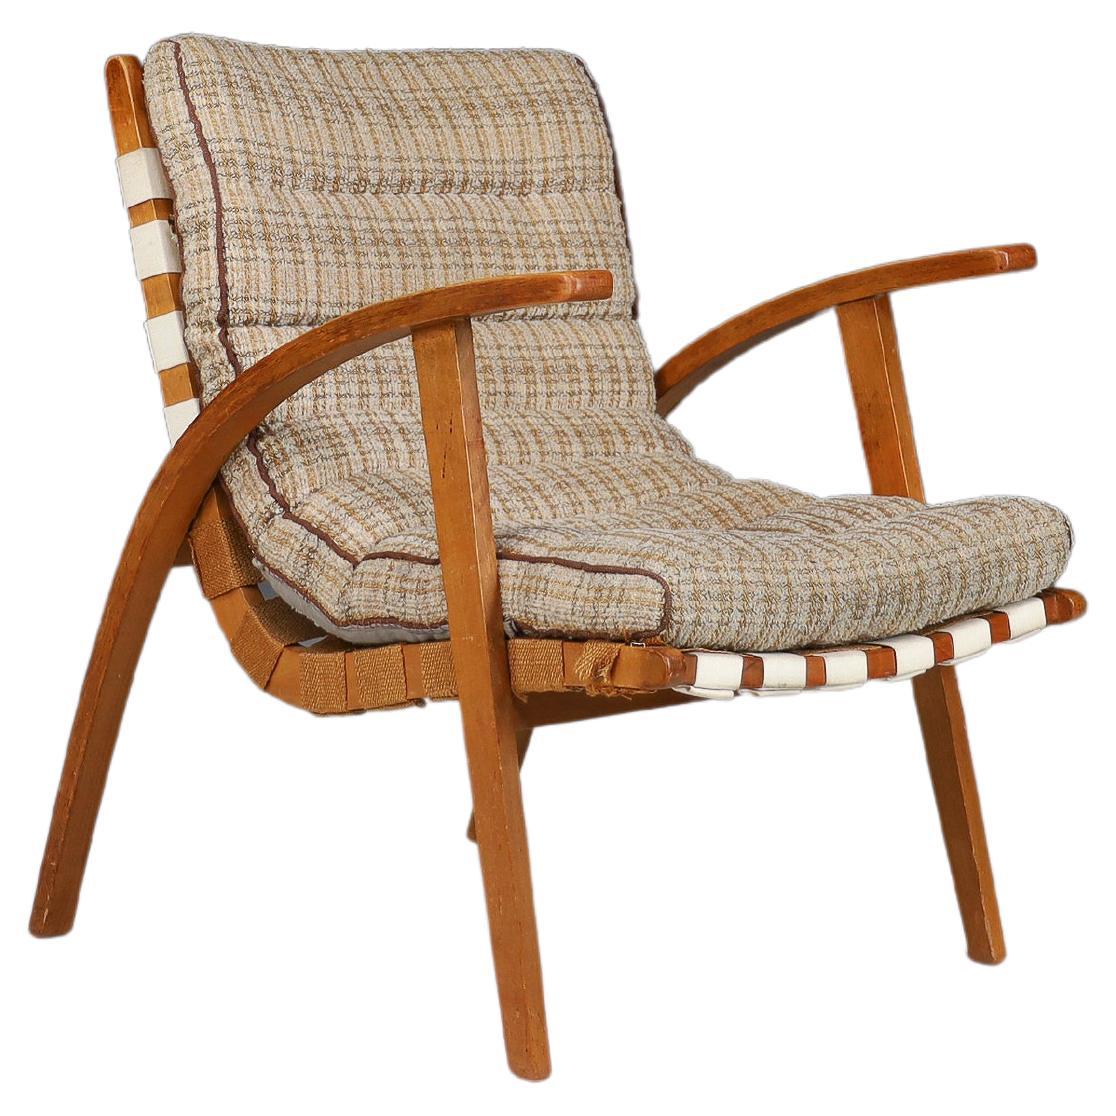 Jan Vanek Easy Chair in Bentwood and Canvas, Praque, the 1930s For Sale